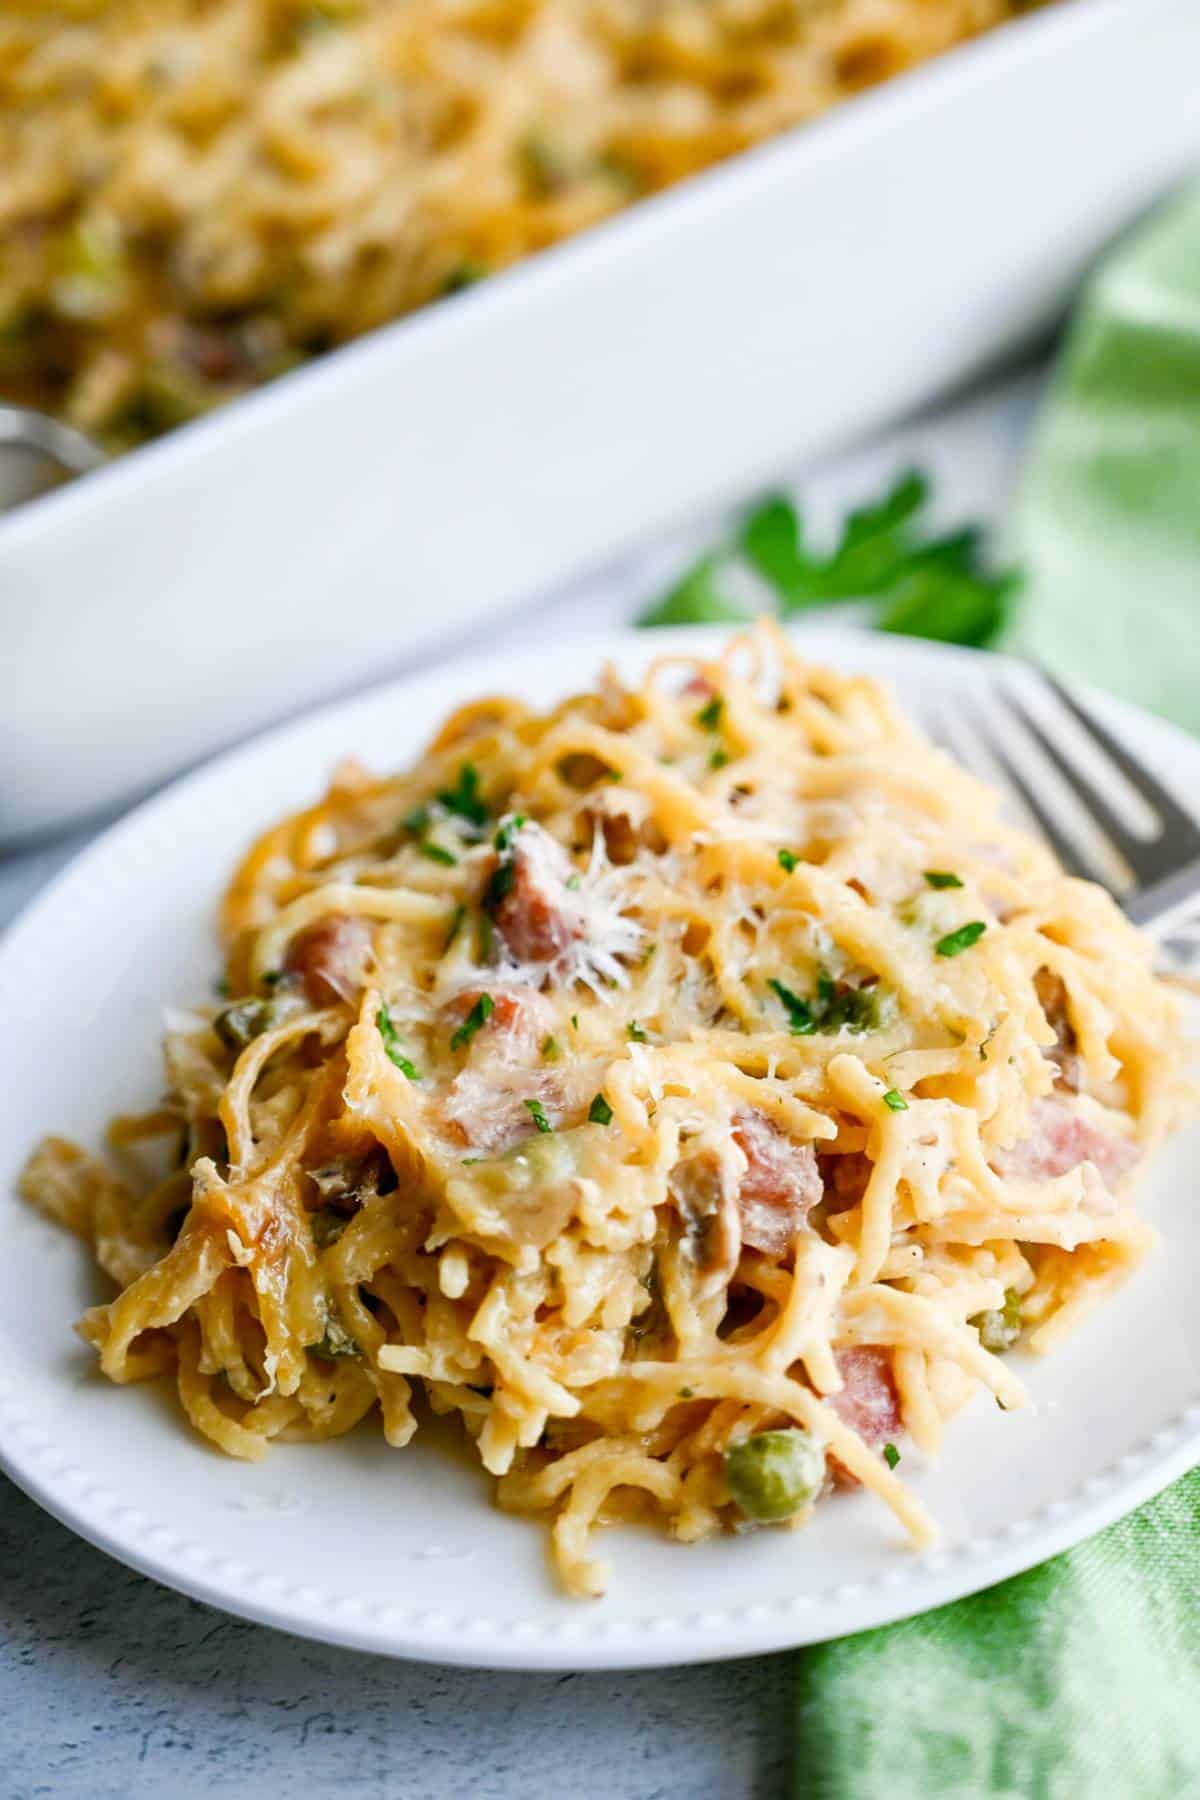 ham spaghetti casserole with peas on a plate with the casserole dish in the background